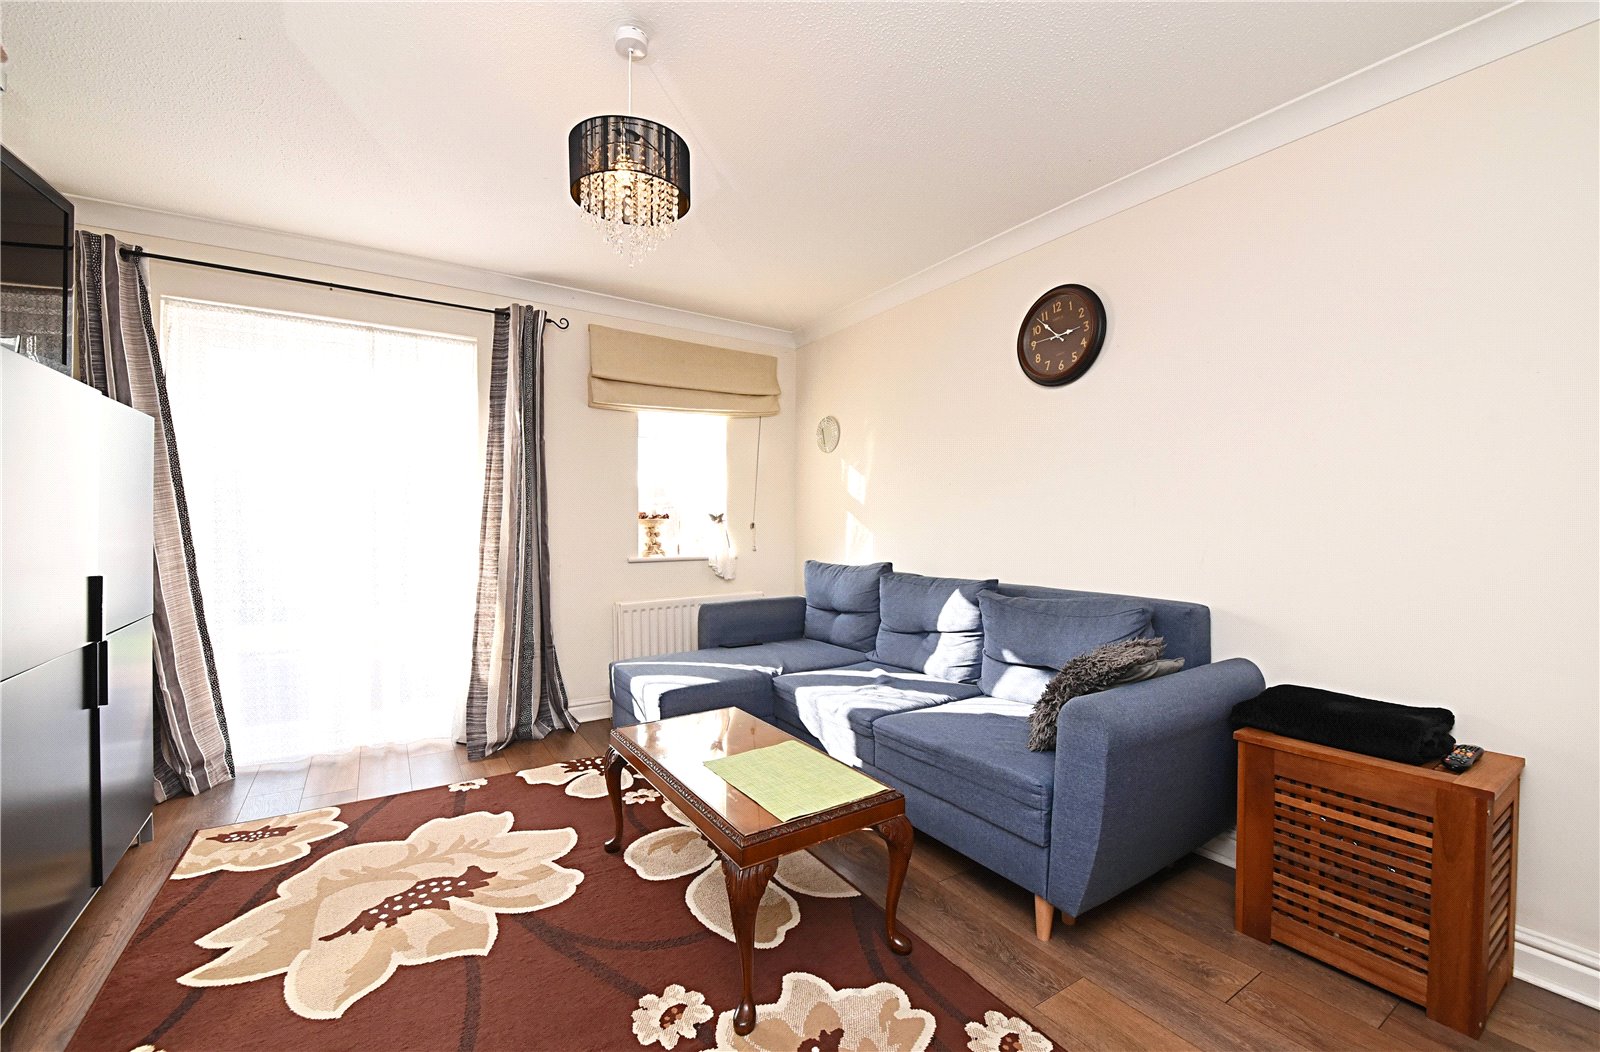 2 bed house to rent in Kingfisher Close, Harrow Weald - Property Image 1